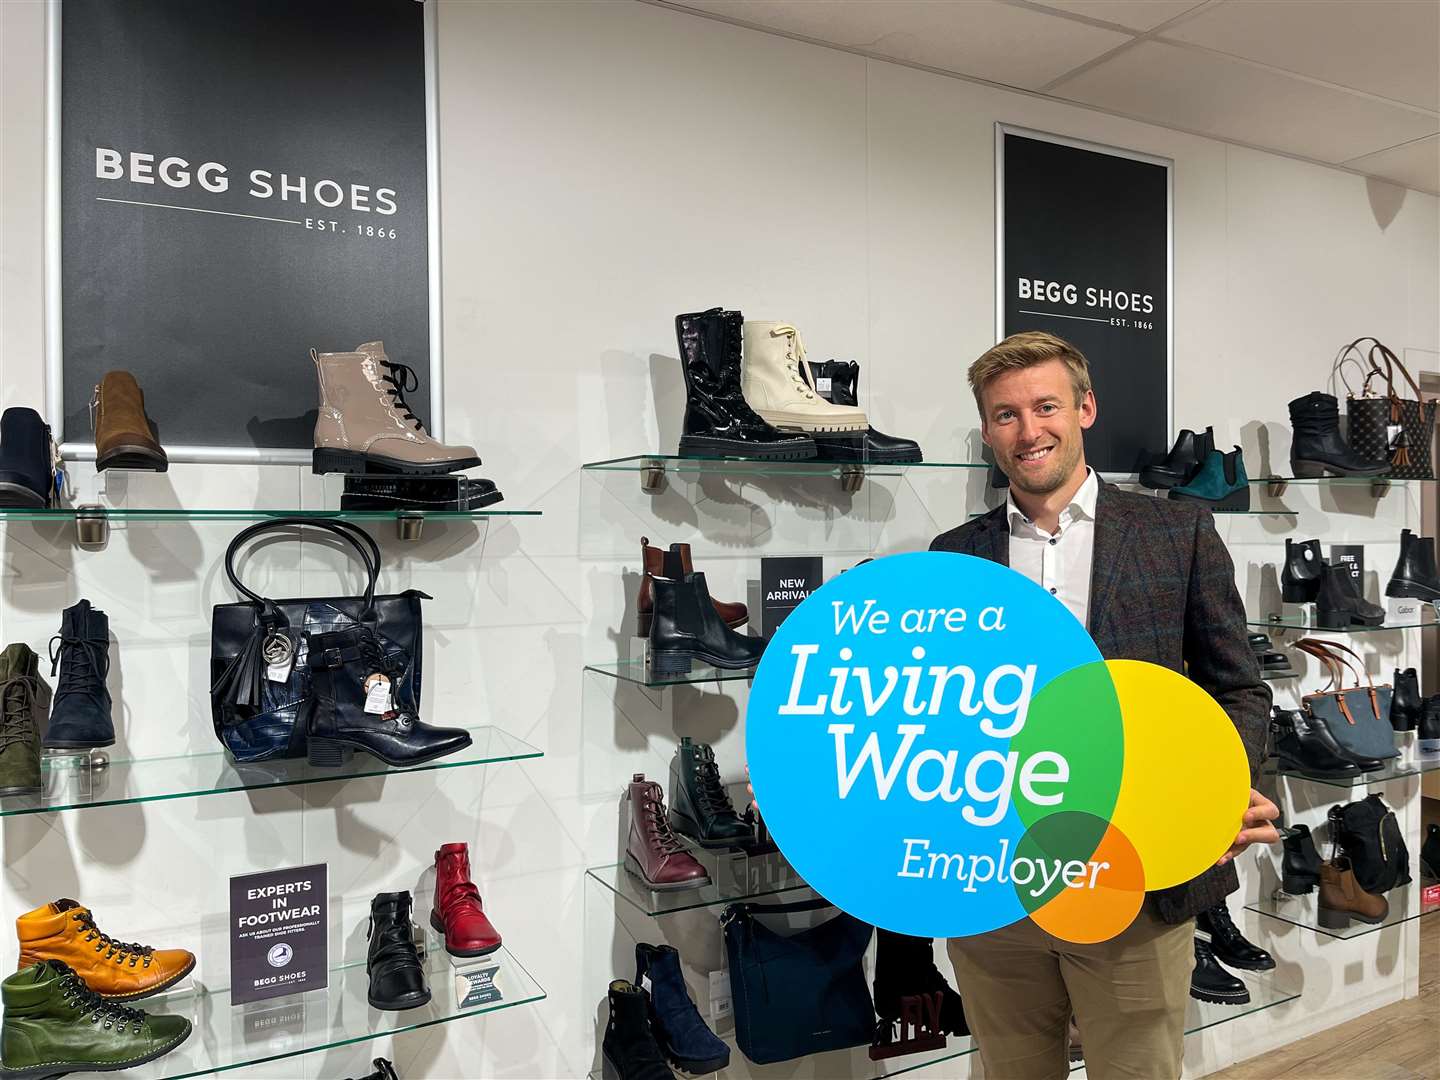 Donald Begg says the Real Living Wage represents an ambitious standard for the retail industry.